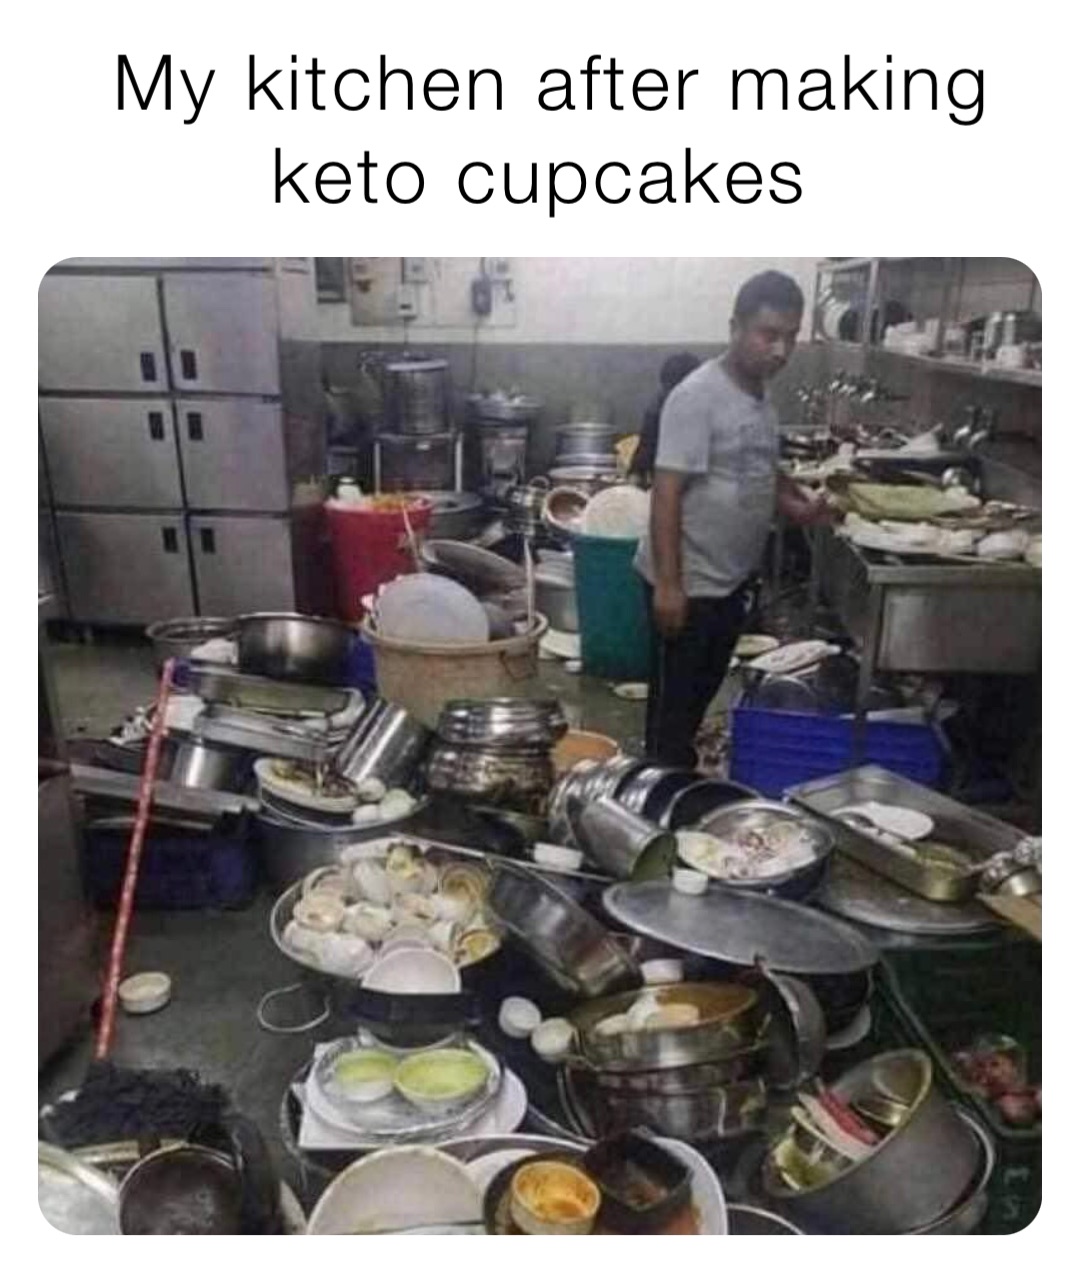 My kitchen after making keto cupcakes